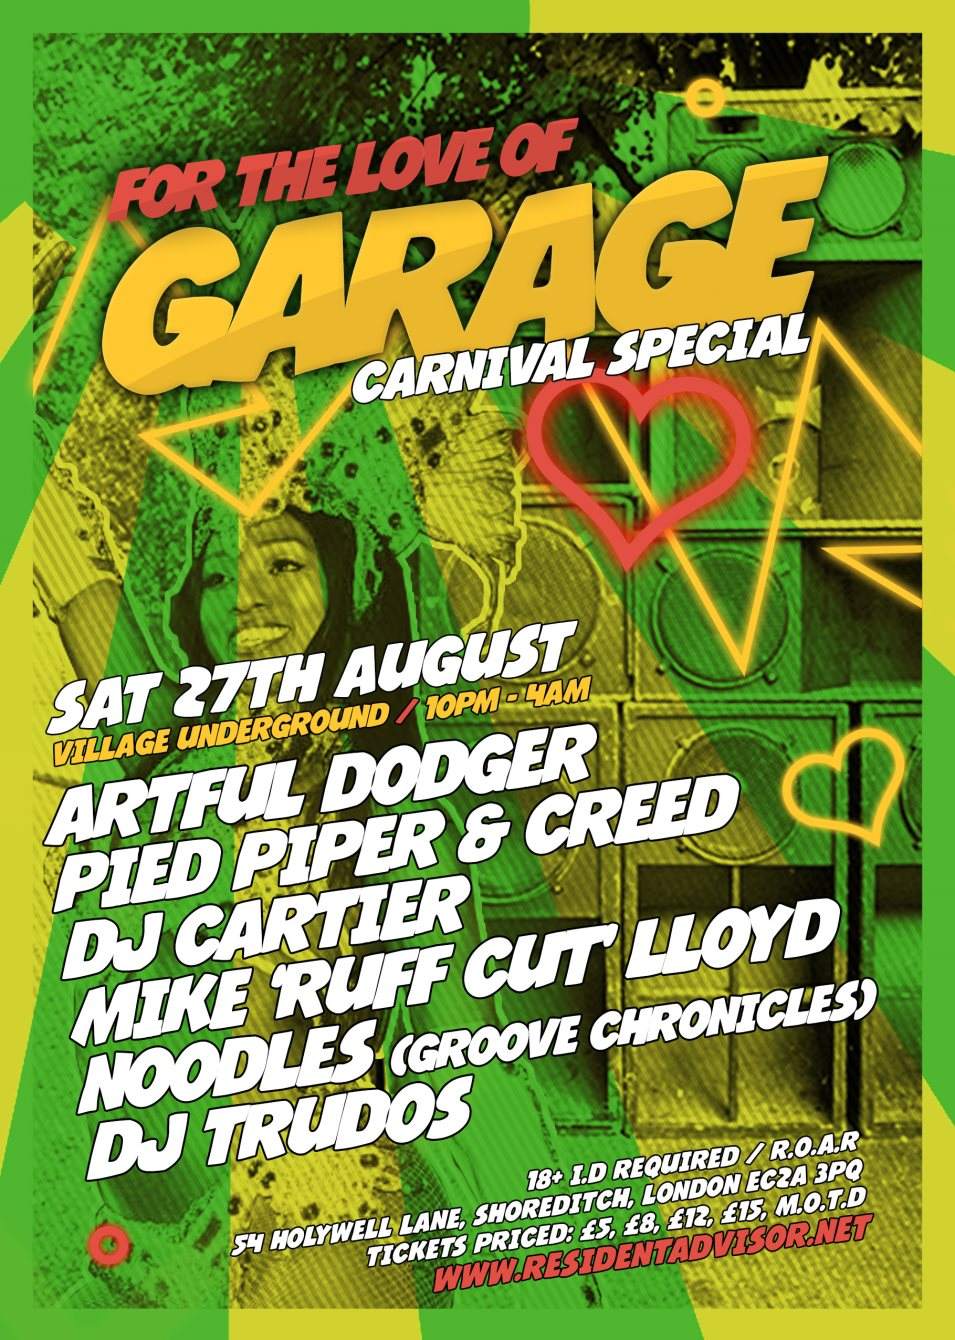 For the Love of Garage - Carnival Special - Página frontal